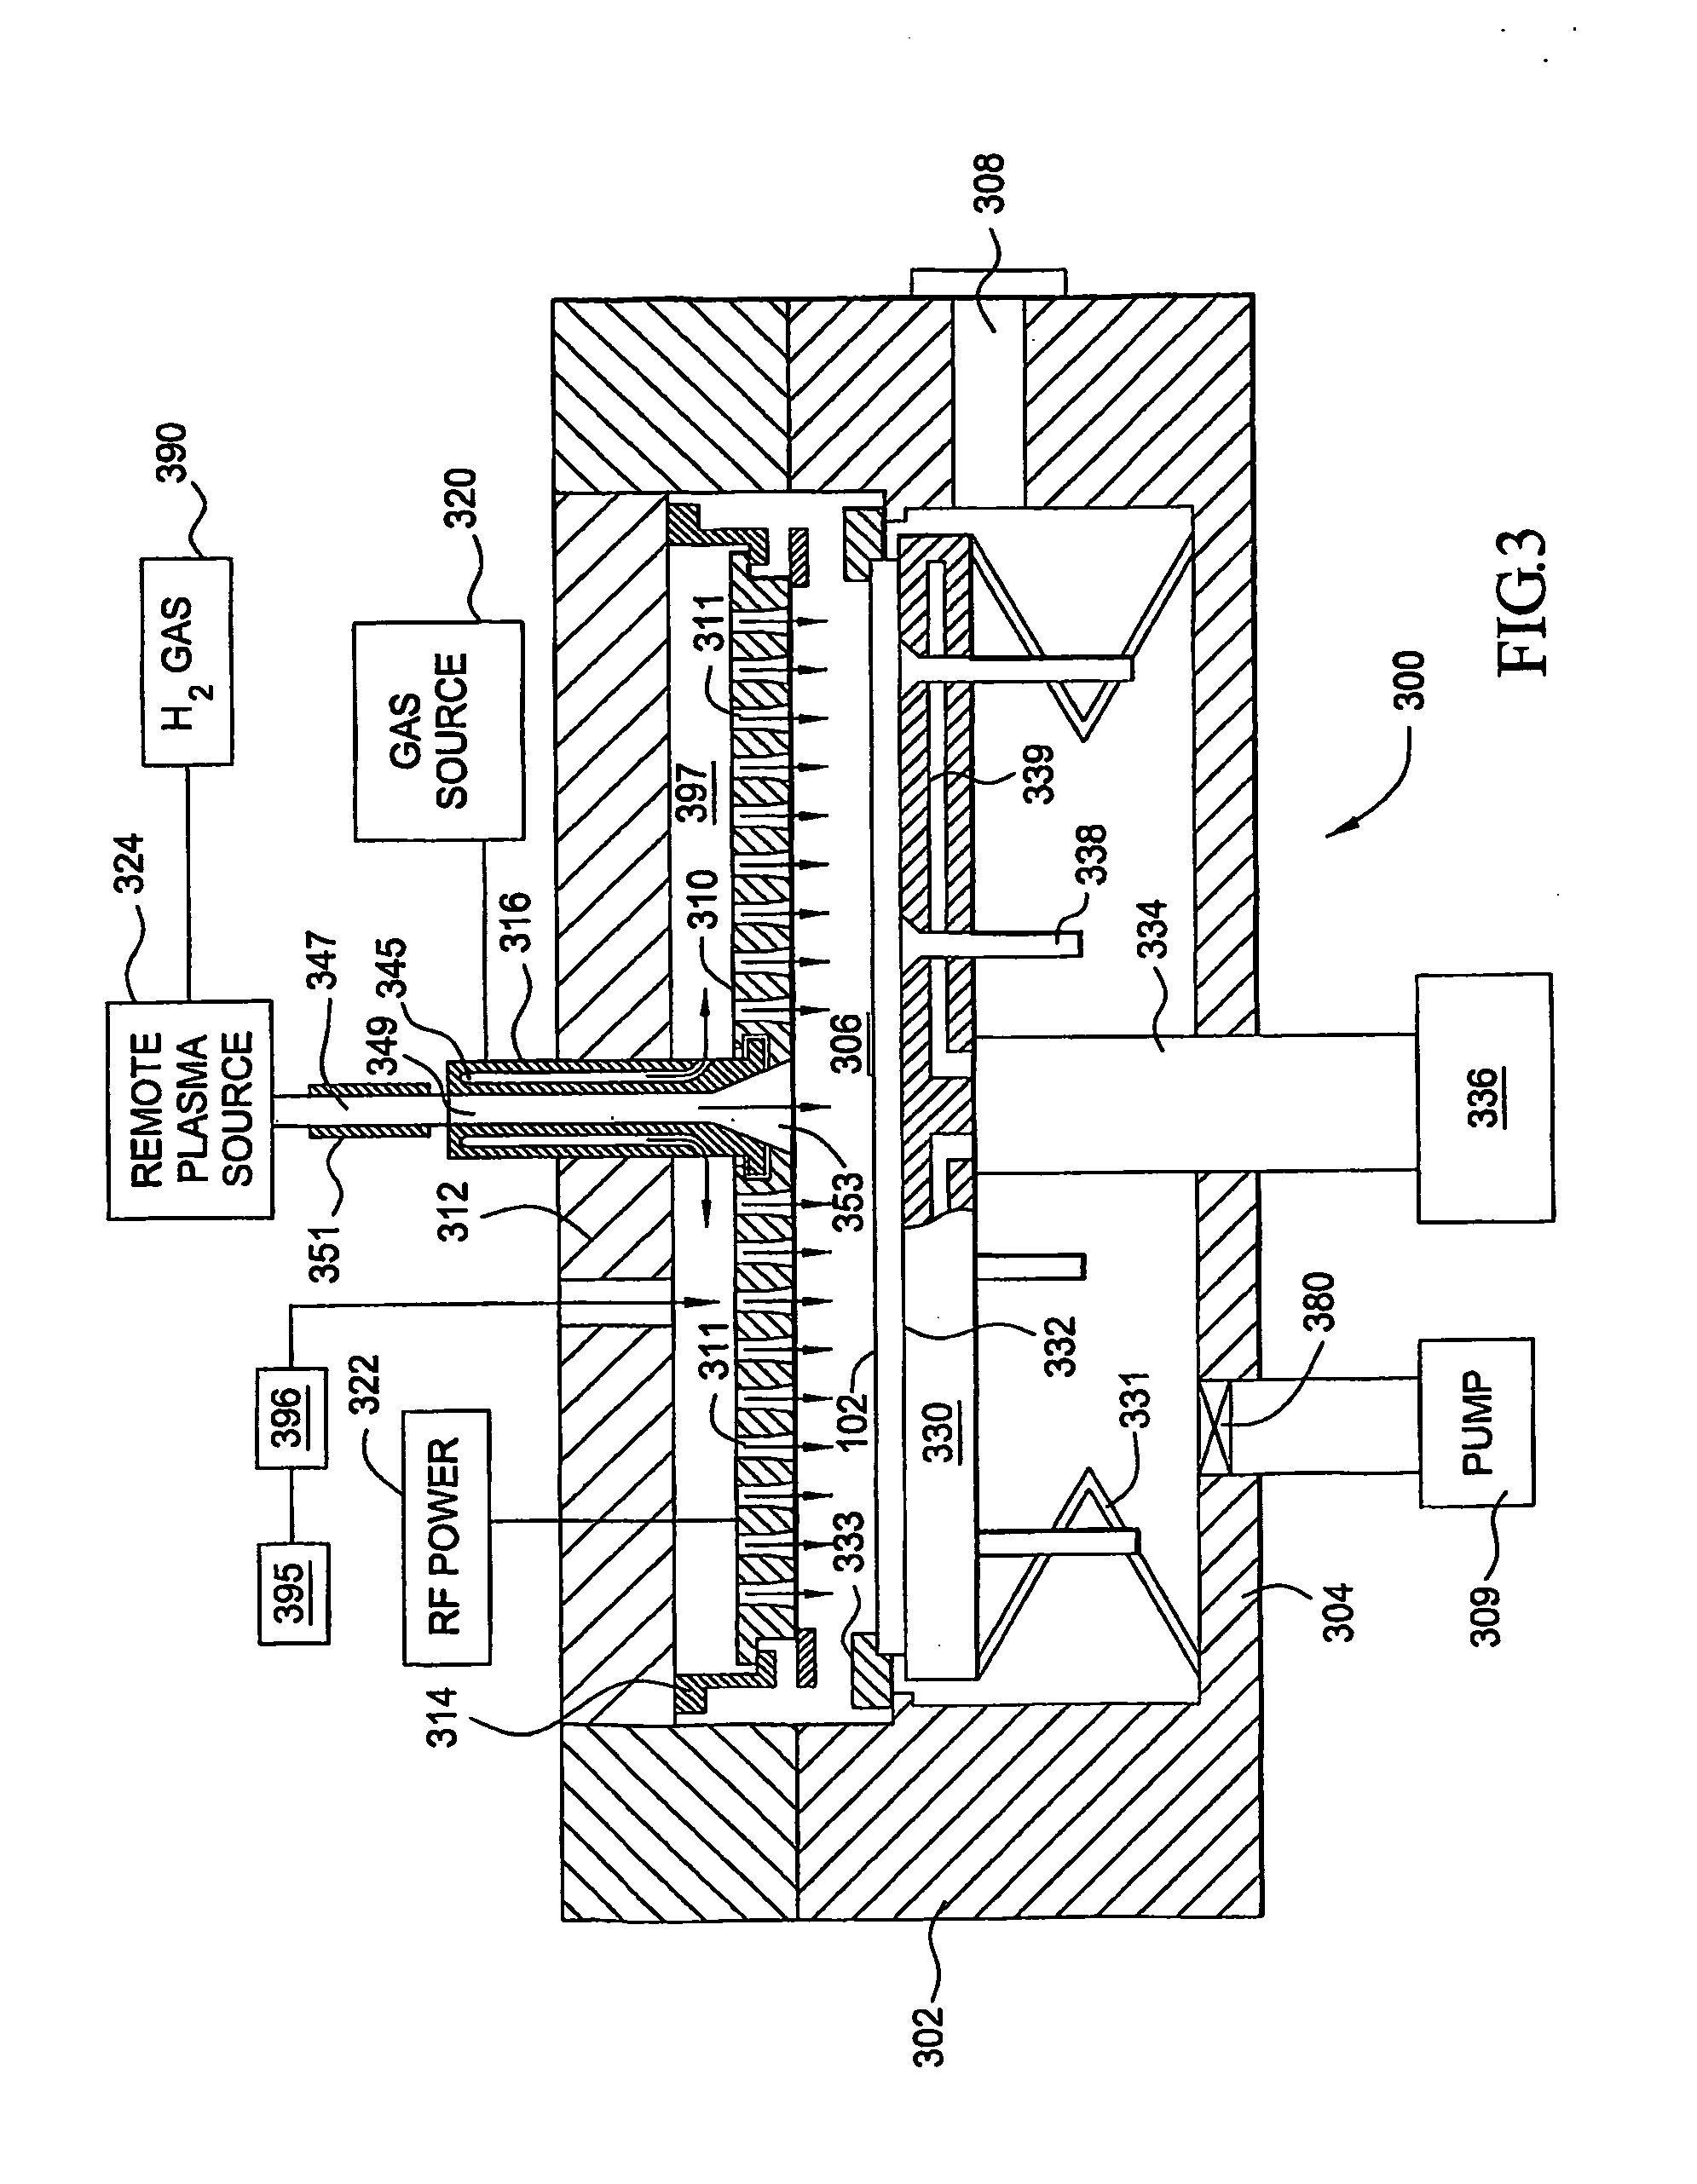 Method and apparatus for remote plasma source assisted silicon-containing film deposition